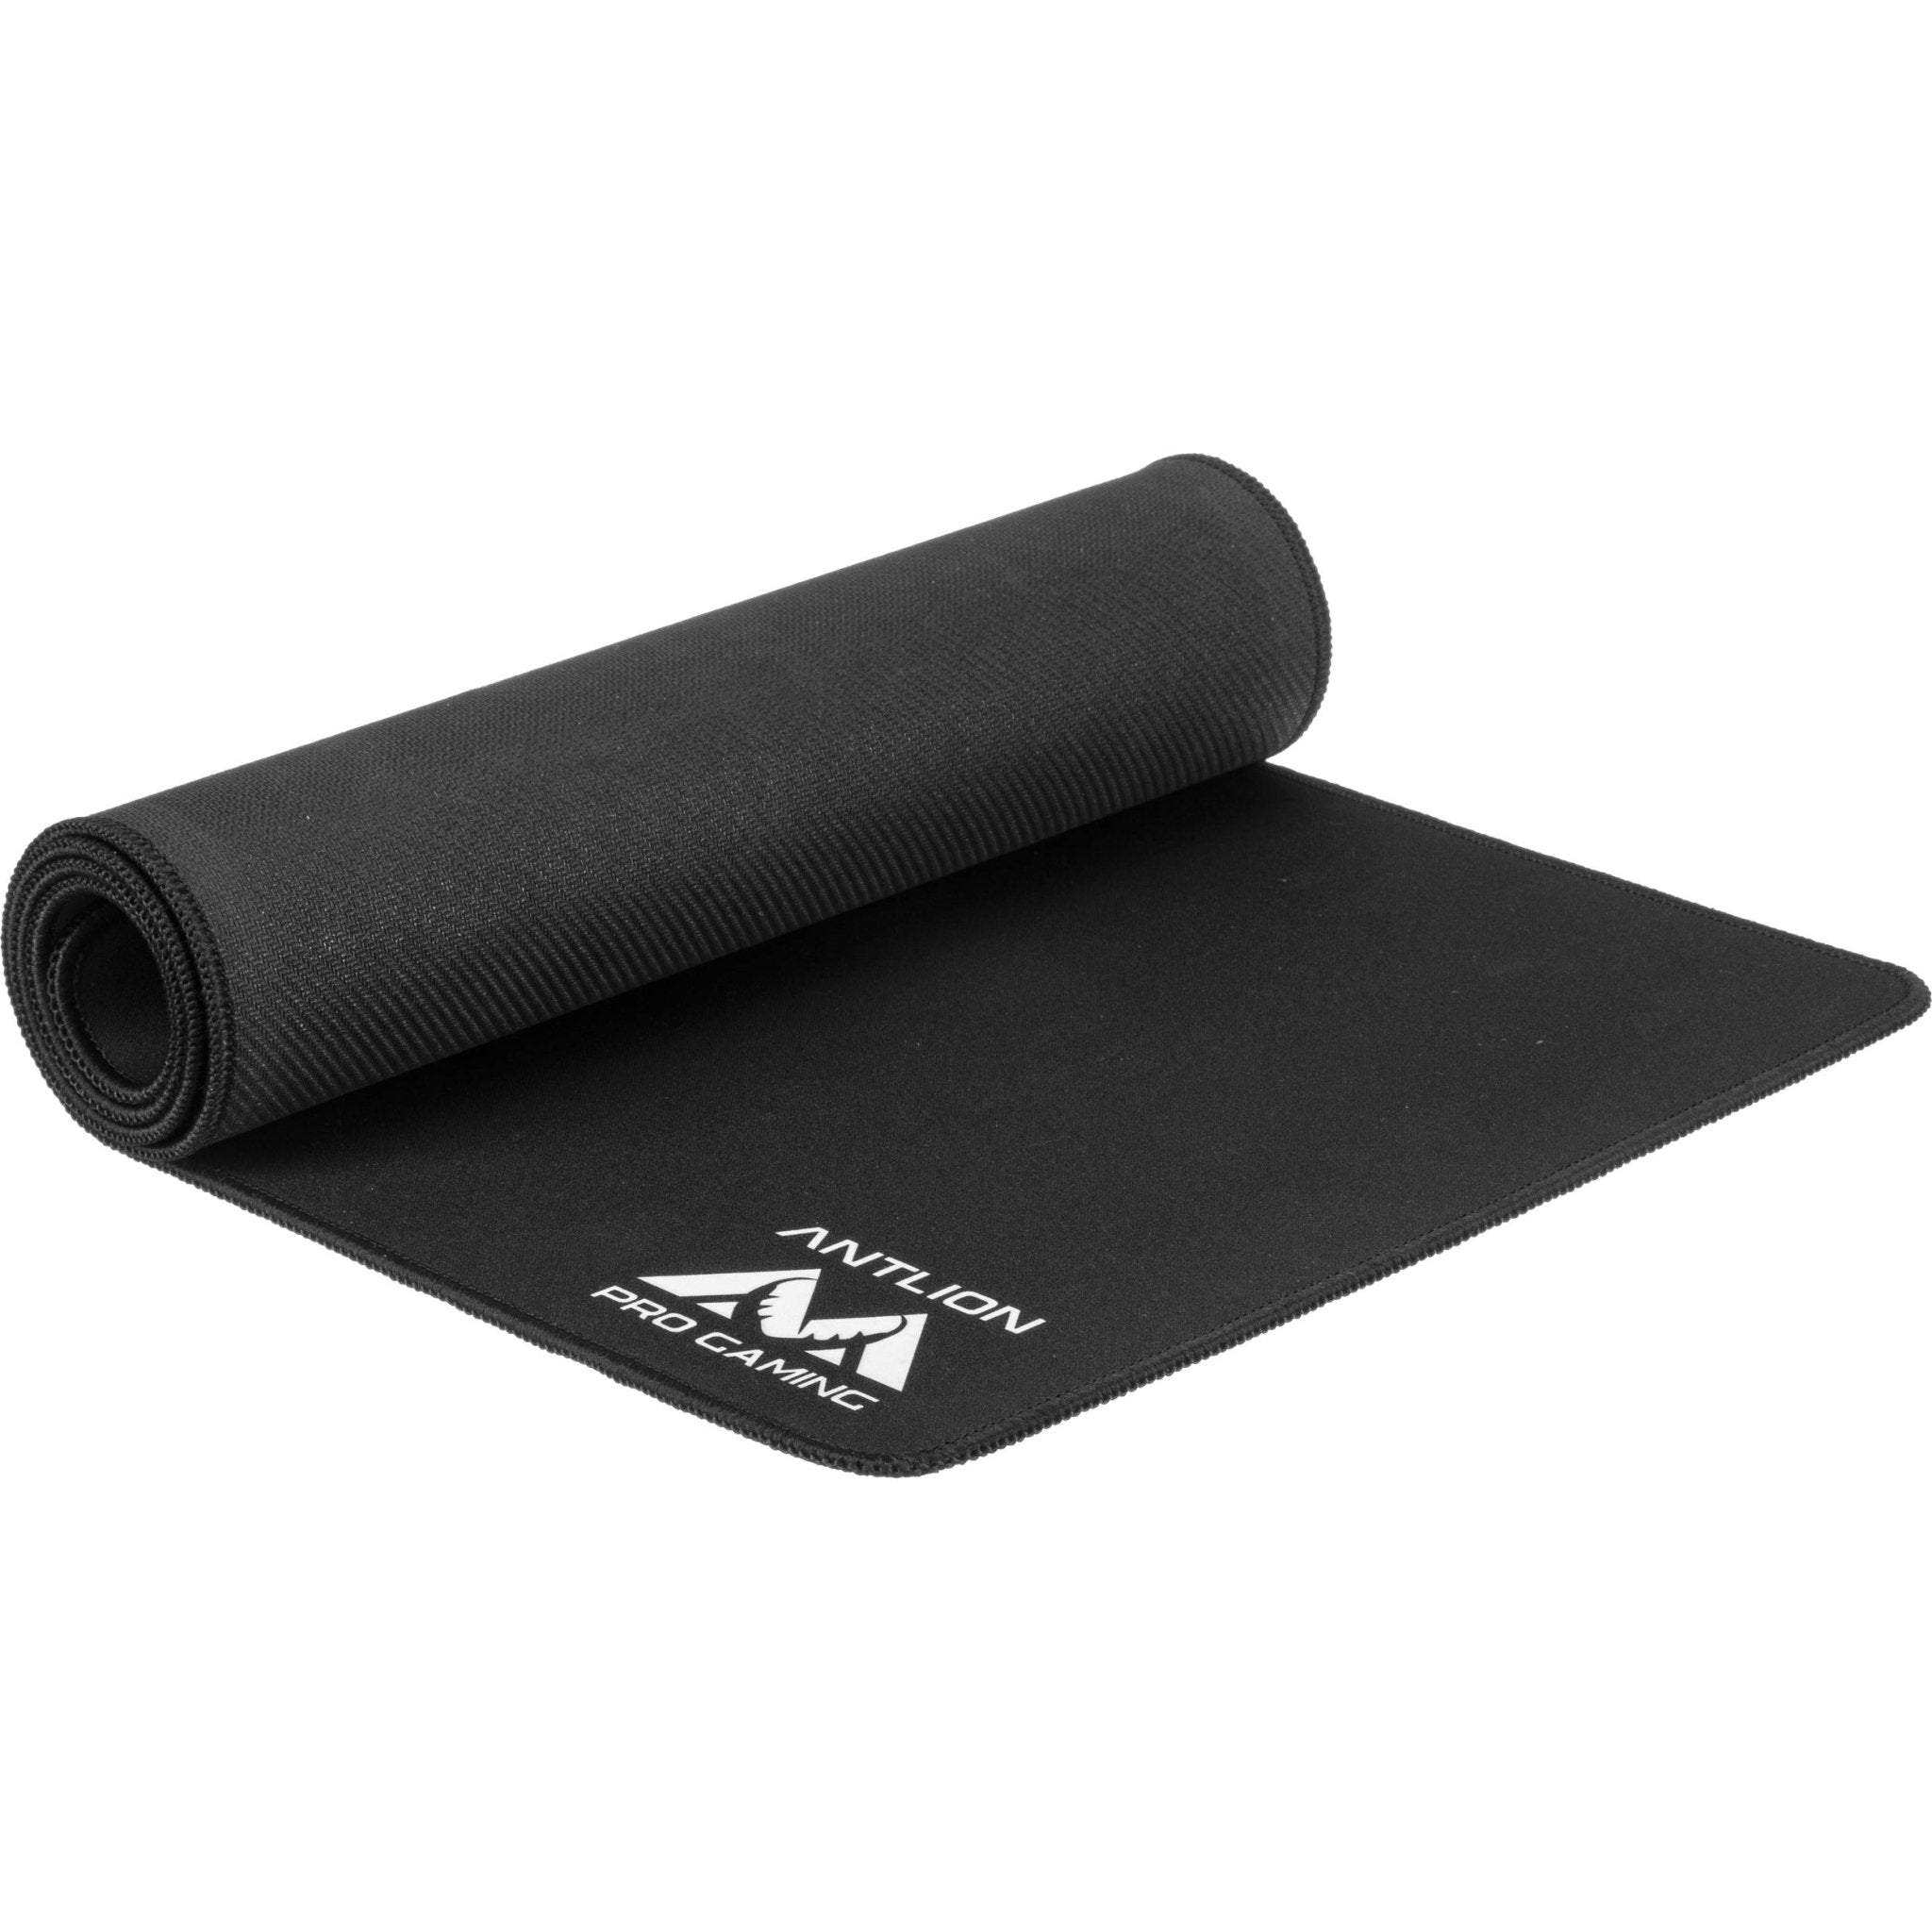 Antlion Pro Gaming Über-Wide Mouse Pad - Store 974 | ستور ٩٧٤